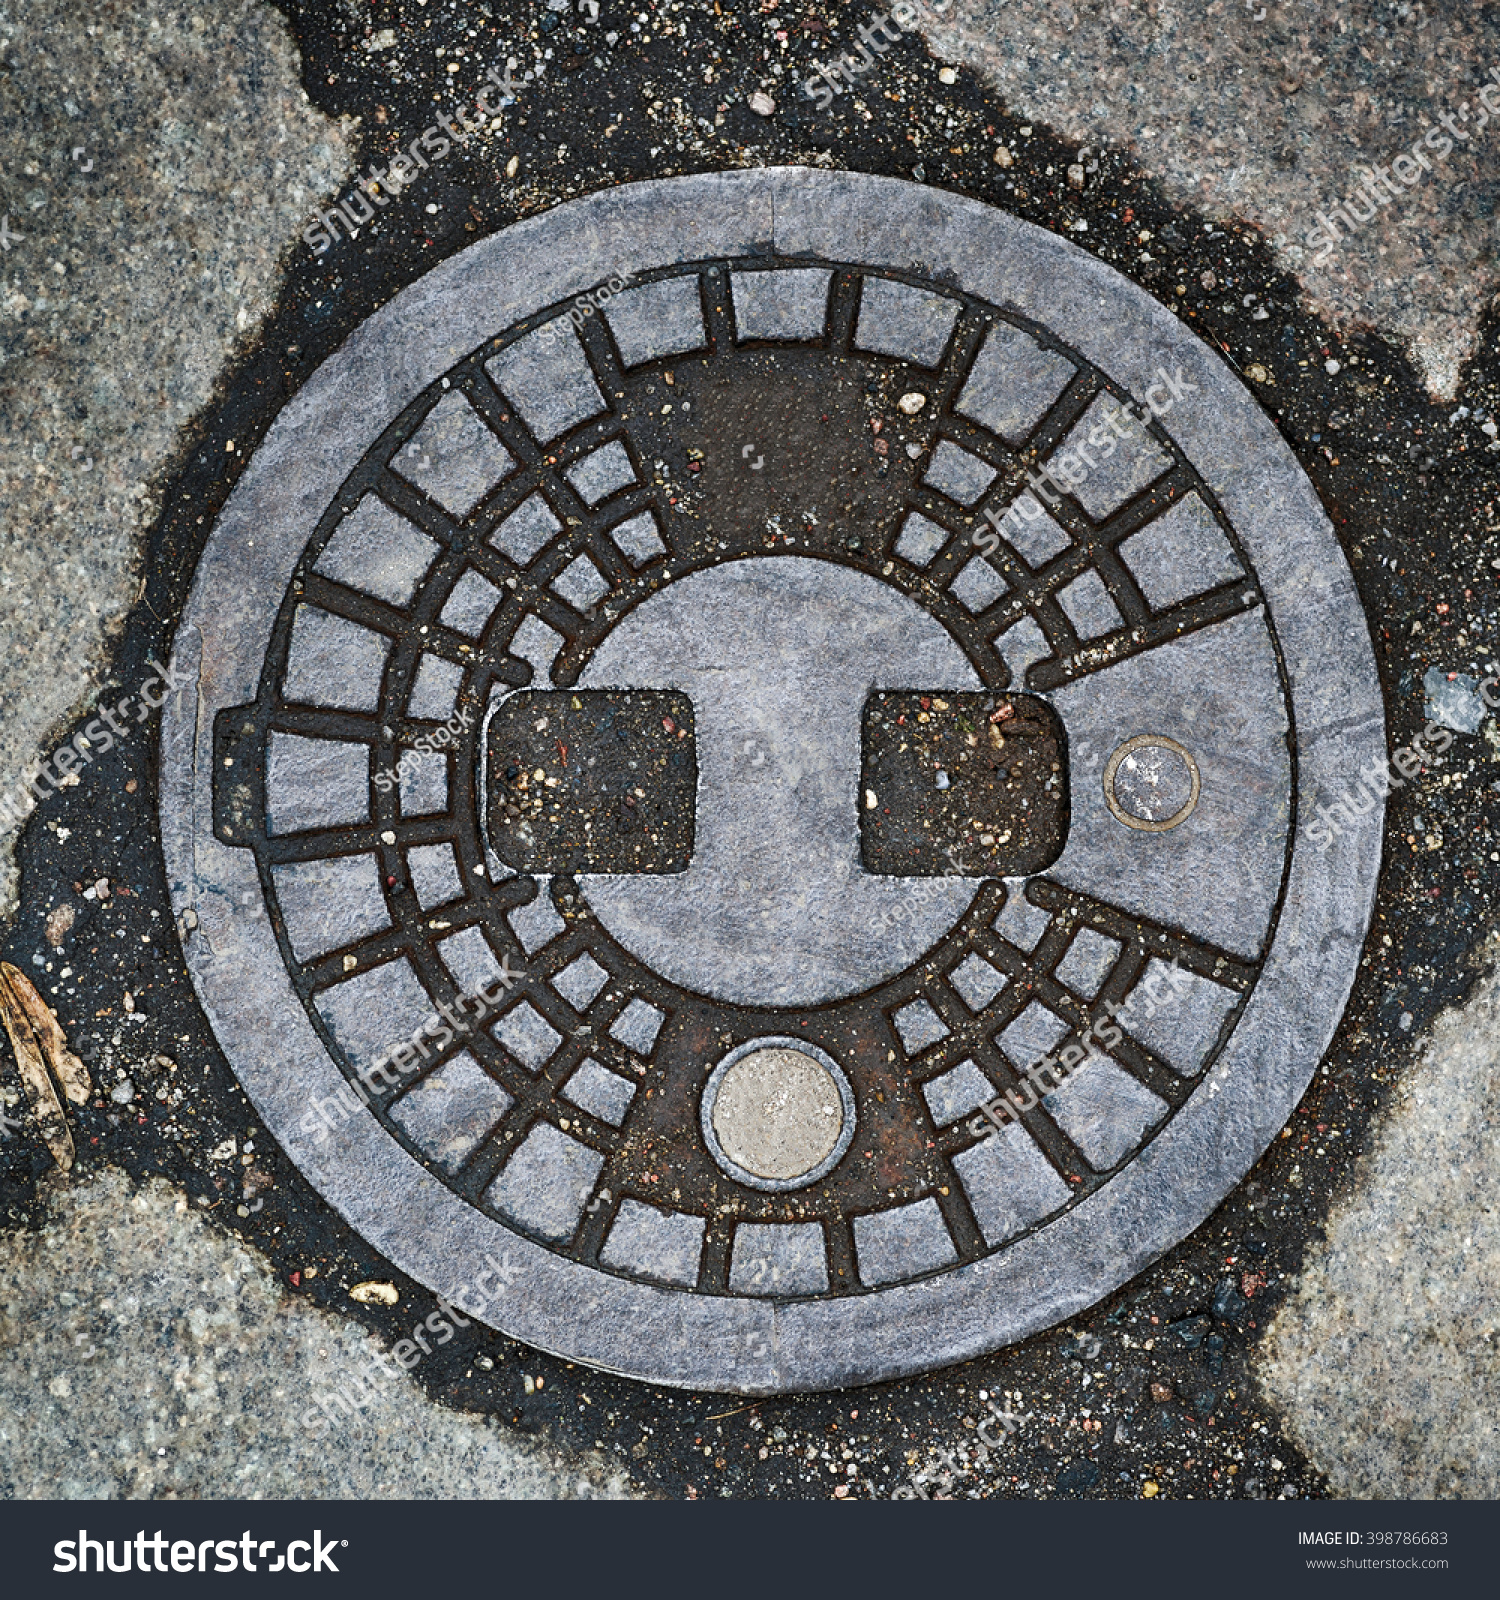 Metal Drain Lid Manhole Cover Abstract Stock Photo (Safe to Use ...